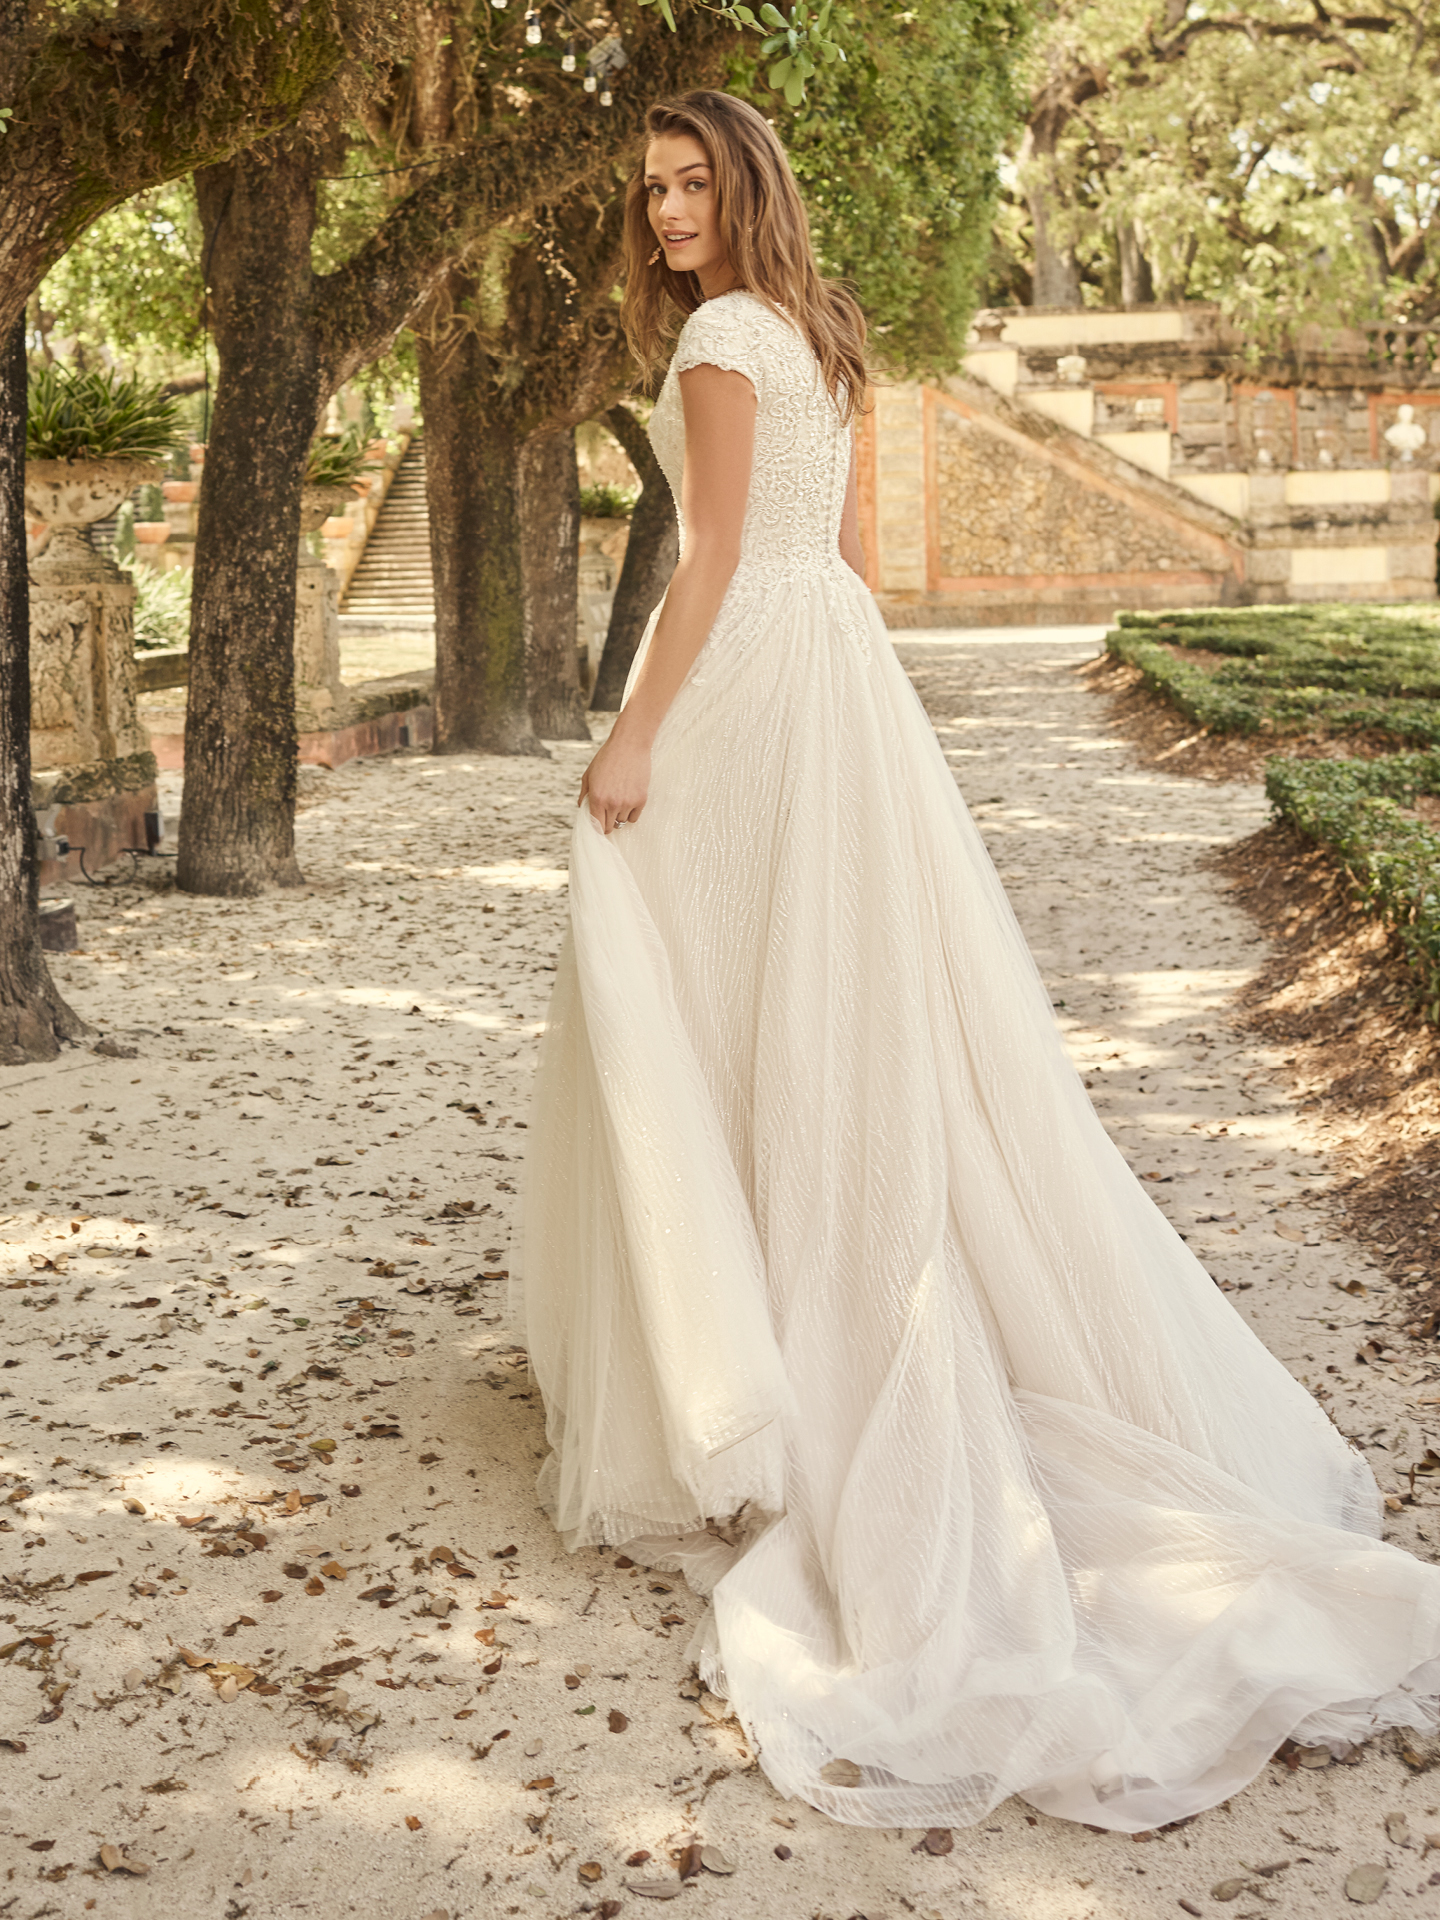 Bride Wearing Modest Cap-Sleeve Princess Wedding Dress Called Pearson by Maggie Sottero